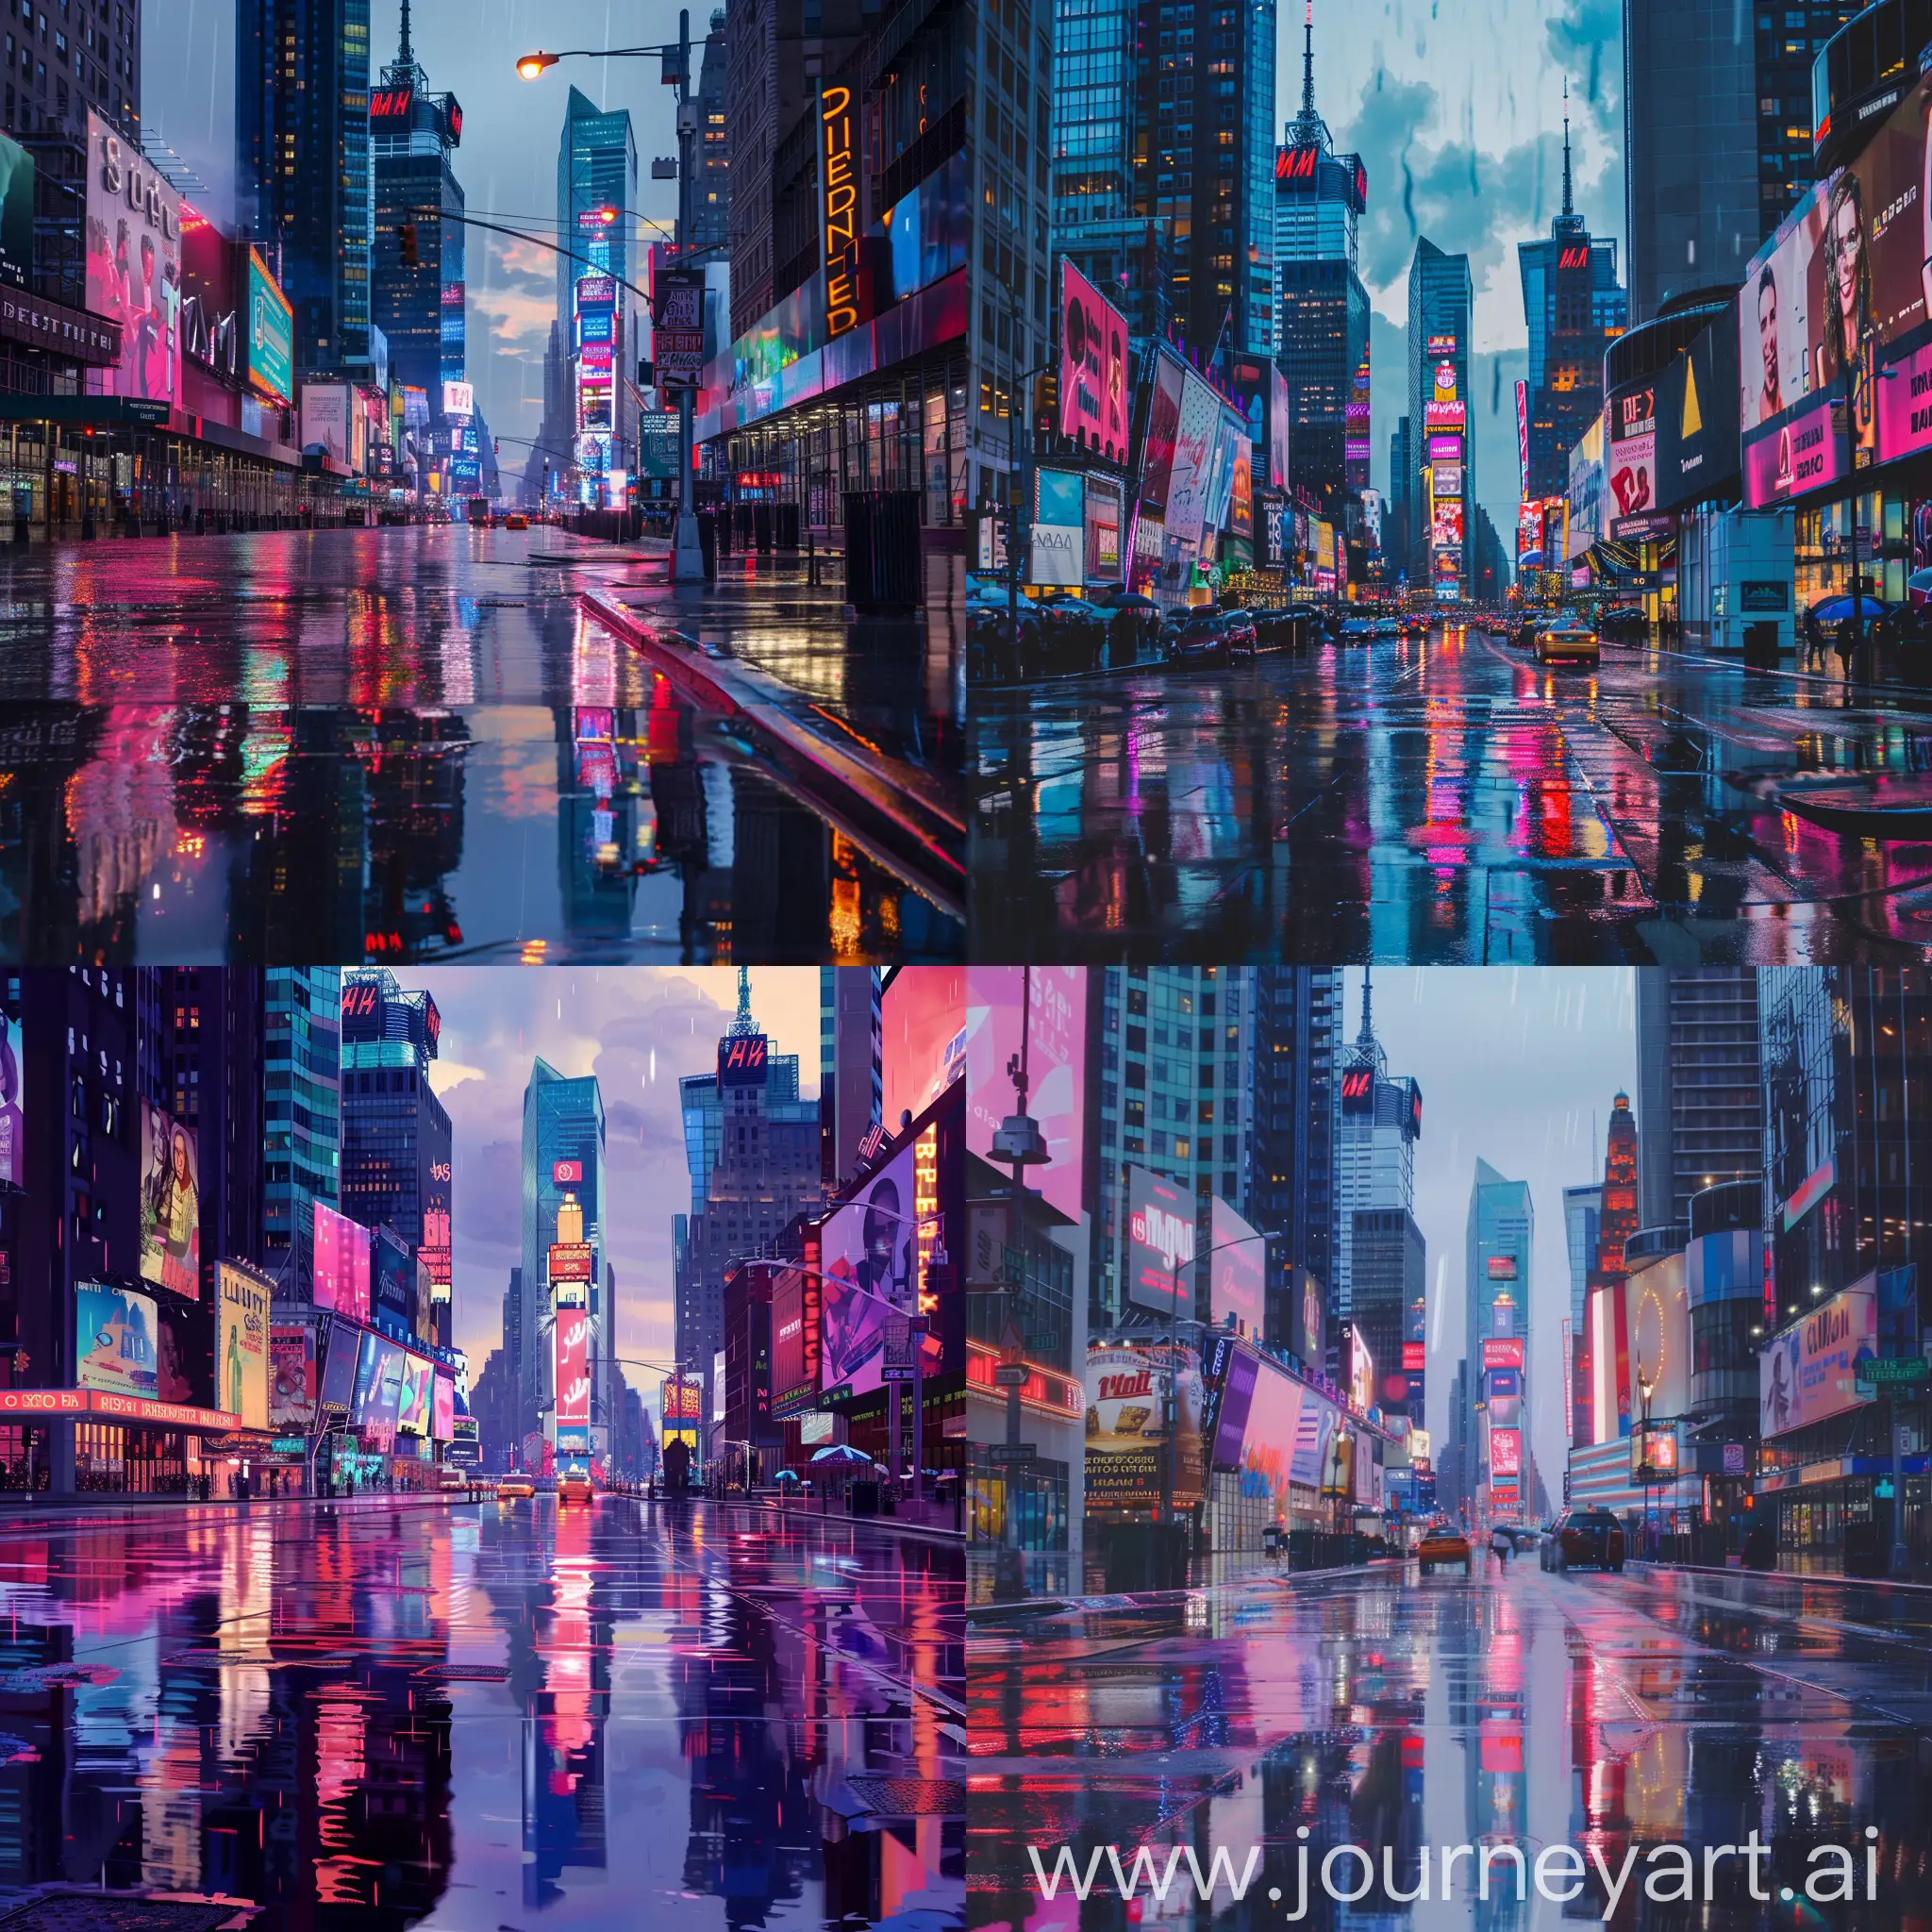 Twilight-Cityscape-with-Skyscrapers-and-Neon-Lights-Reflecting-on-Rainsoaked-Streets